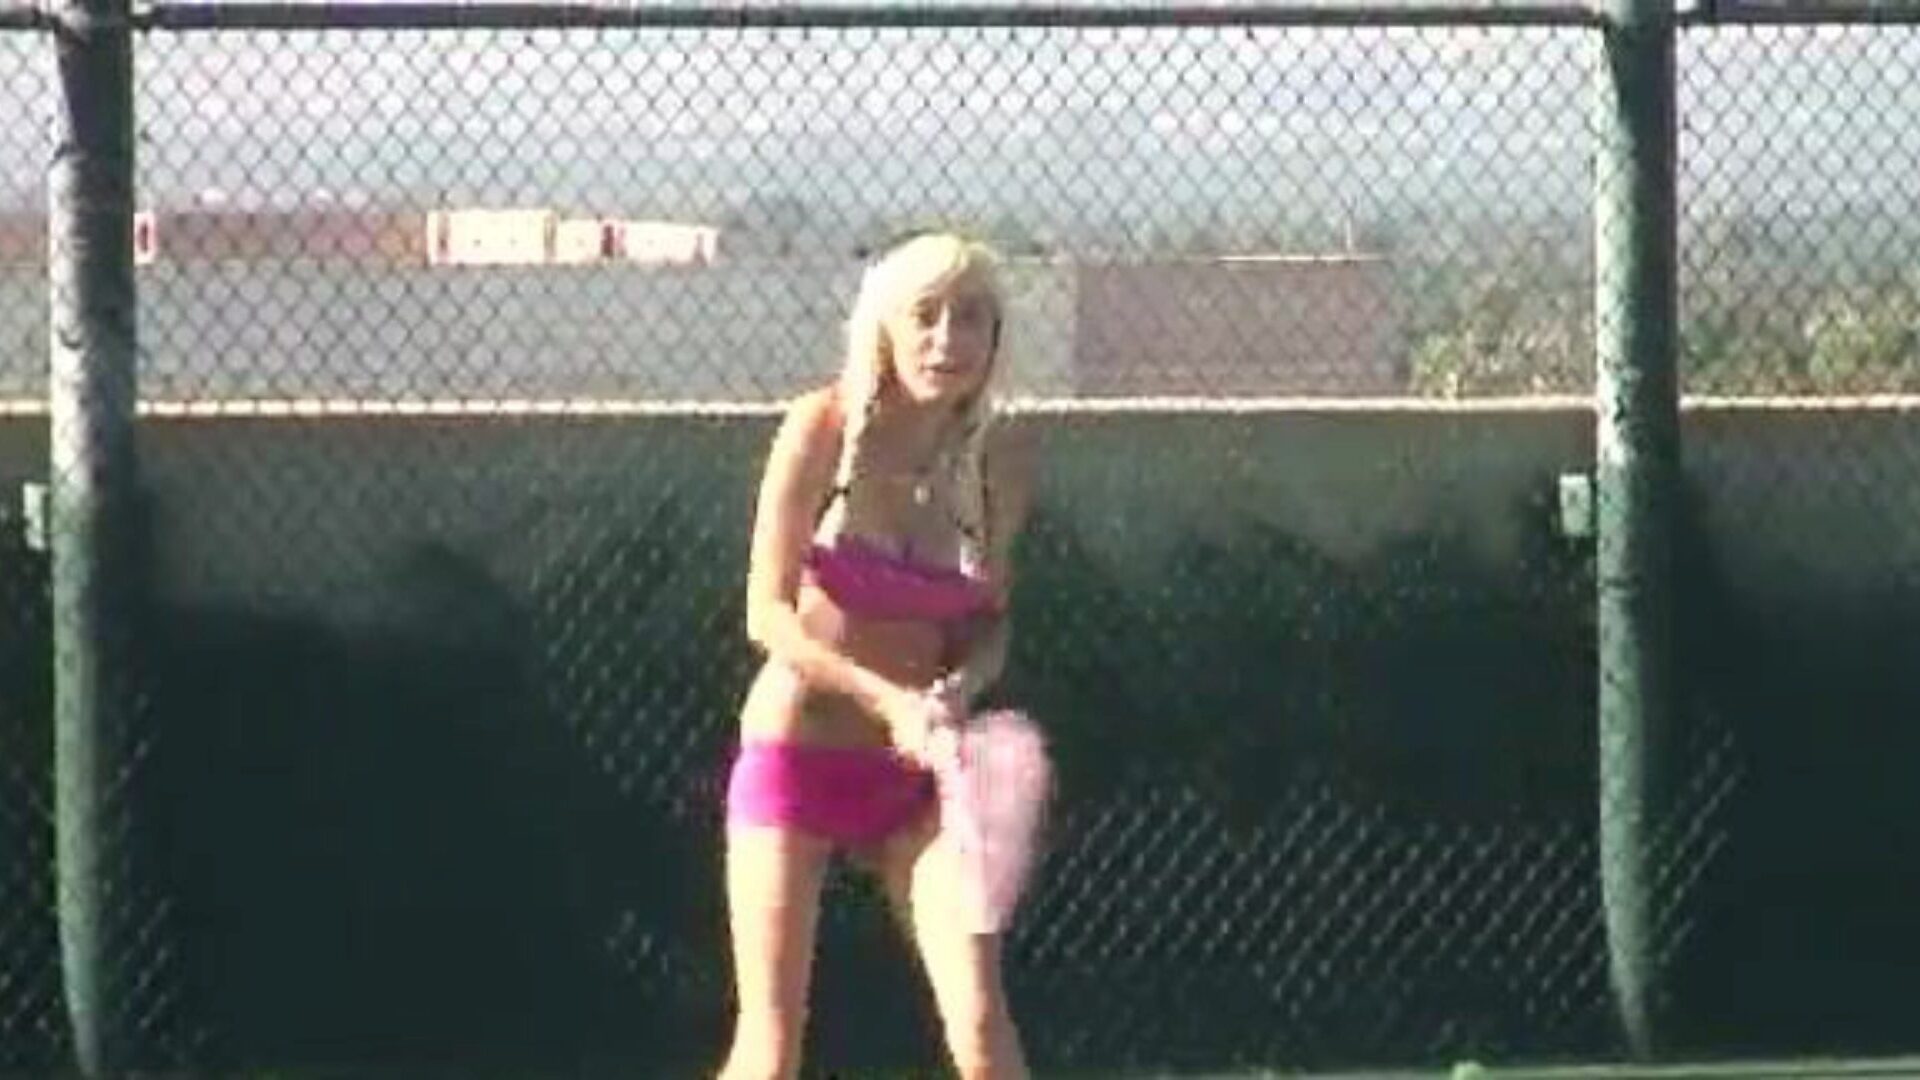 busty blond Morgan Layne getting her vagina frigged and drilled after her tennis